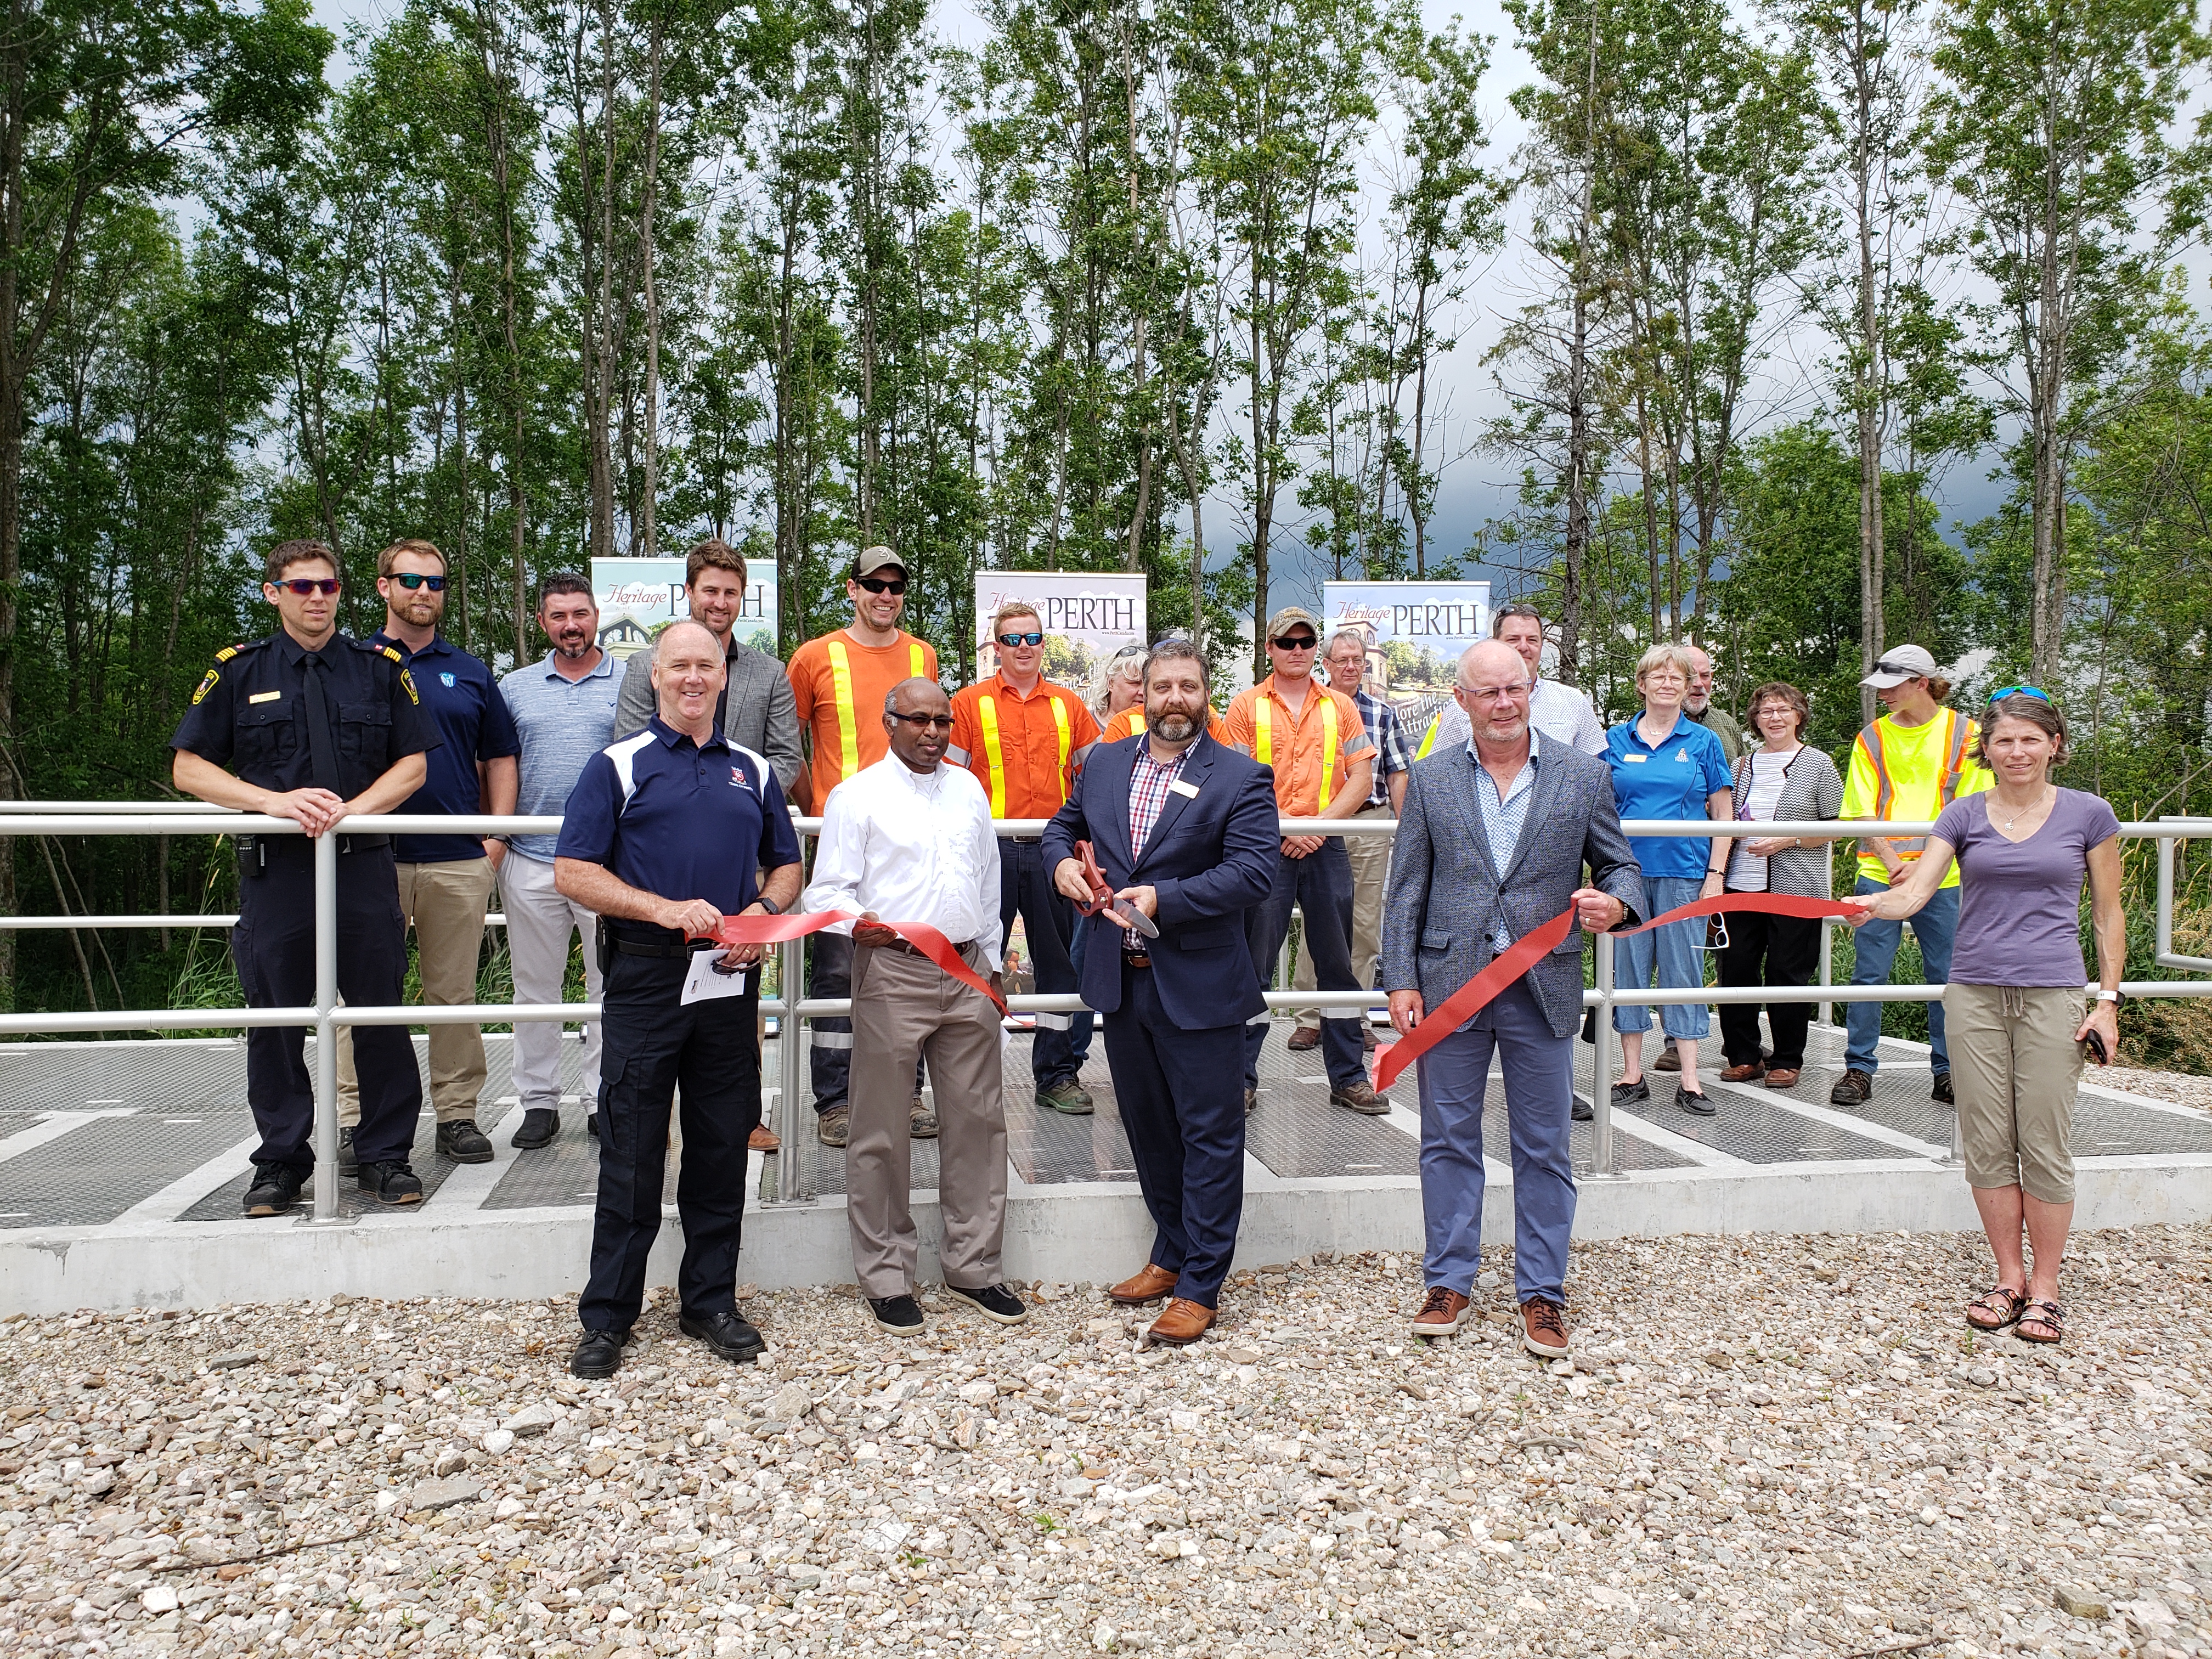 Representatives from the city of Perth cutting the ribbon at a ceremony opening the new wastewater treatment system